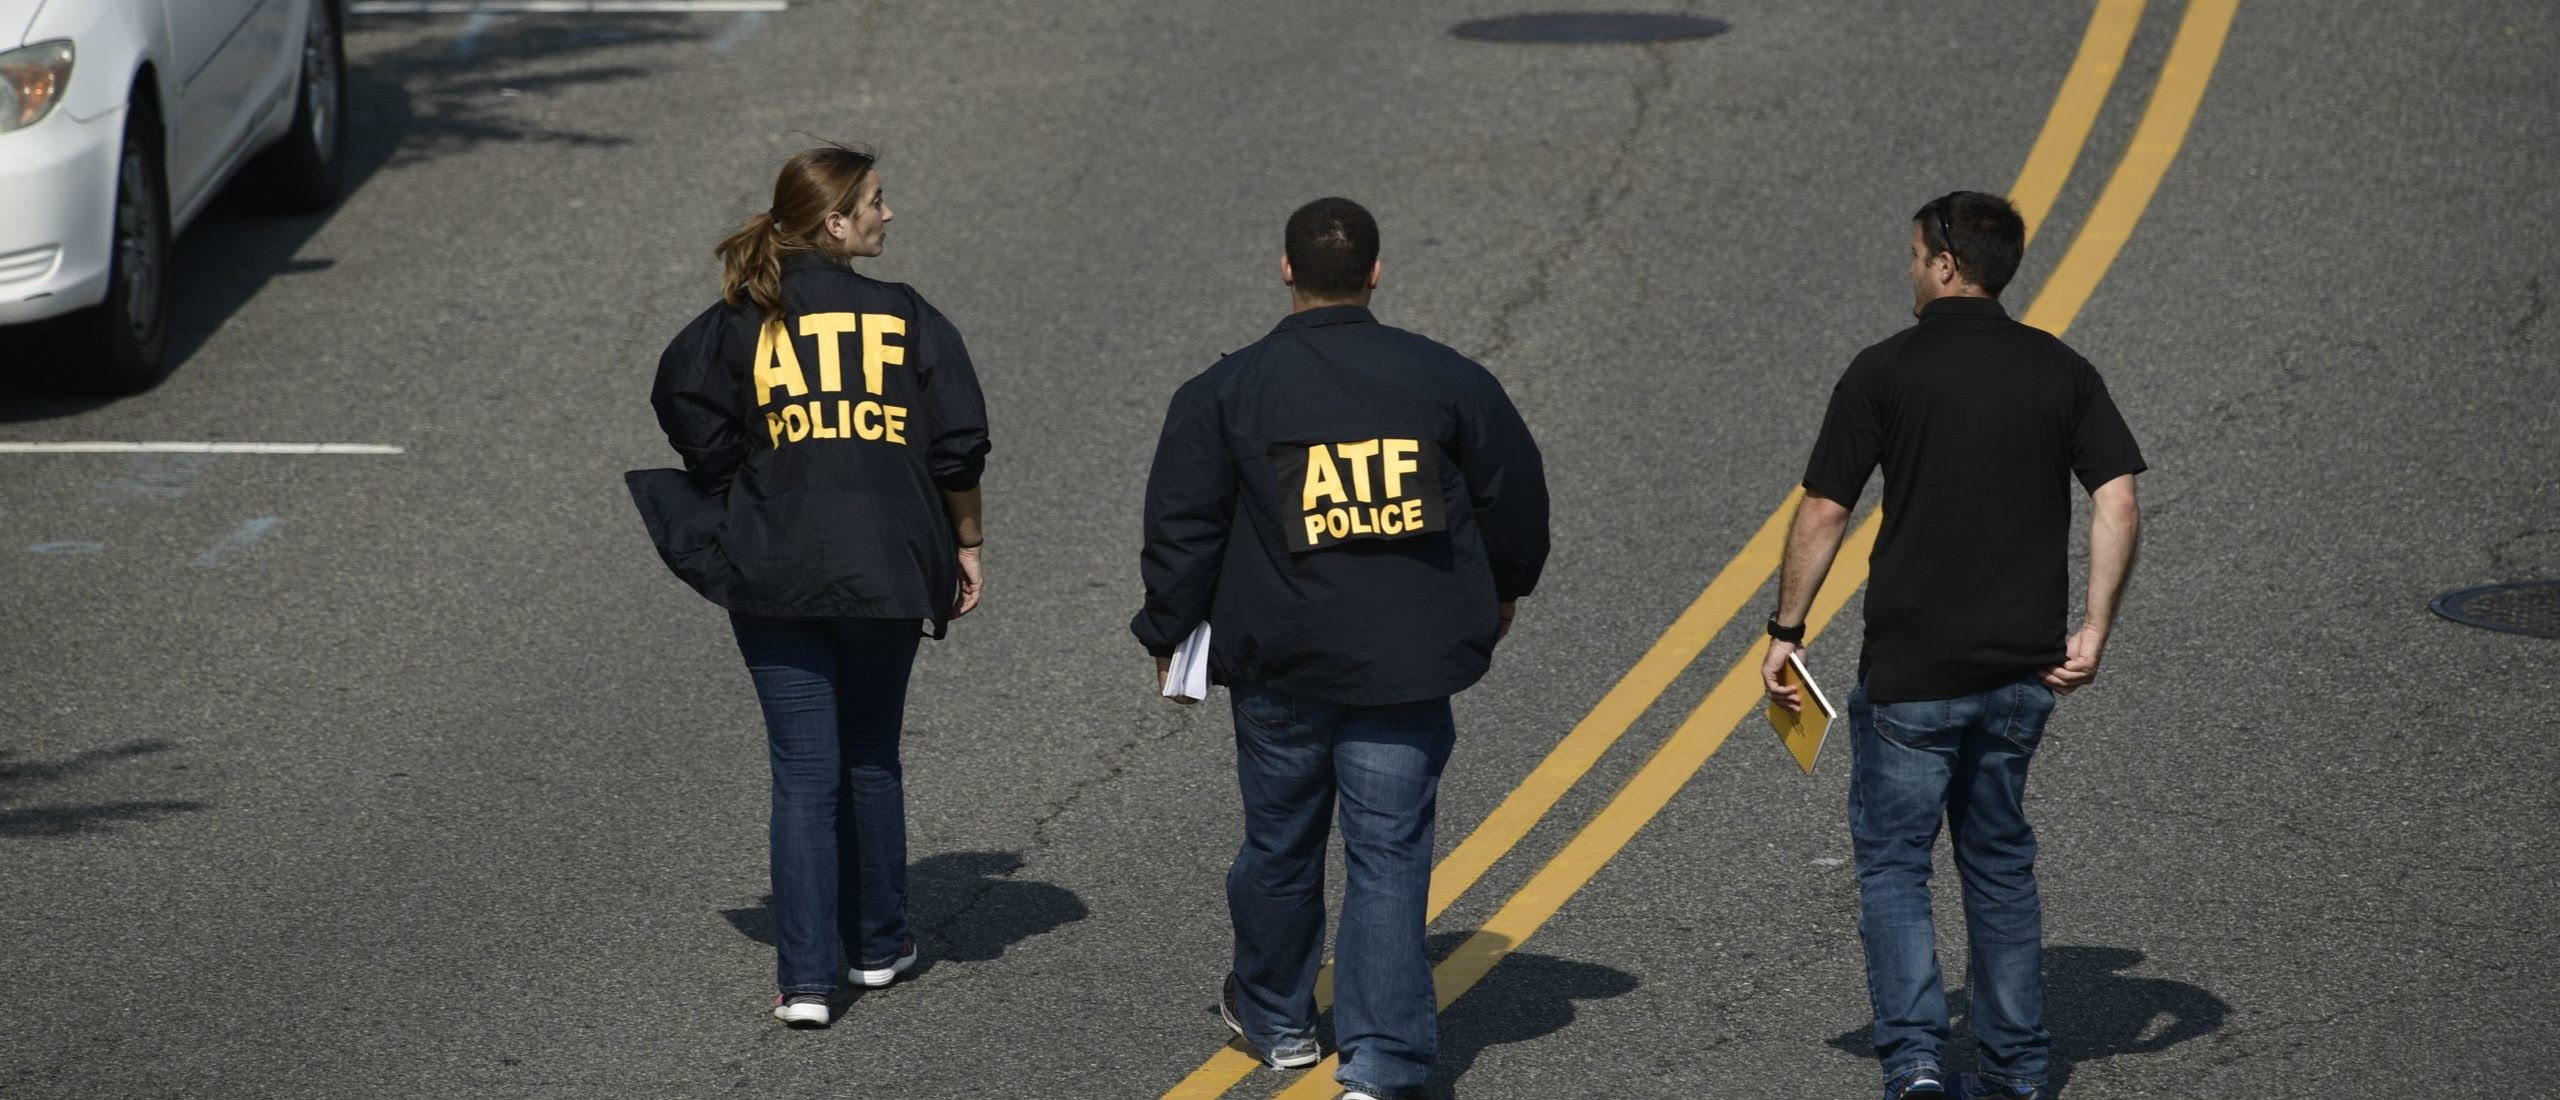 Here’s What You Need To Know About Biden’s New ATF Nominee